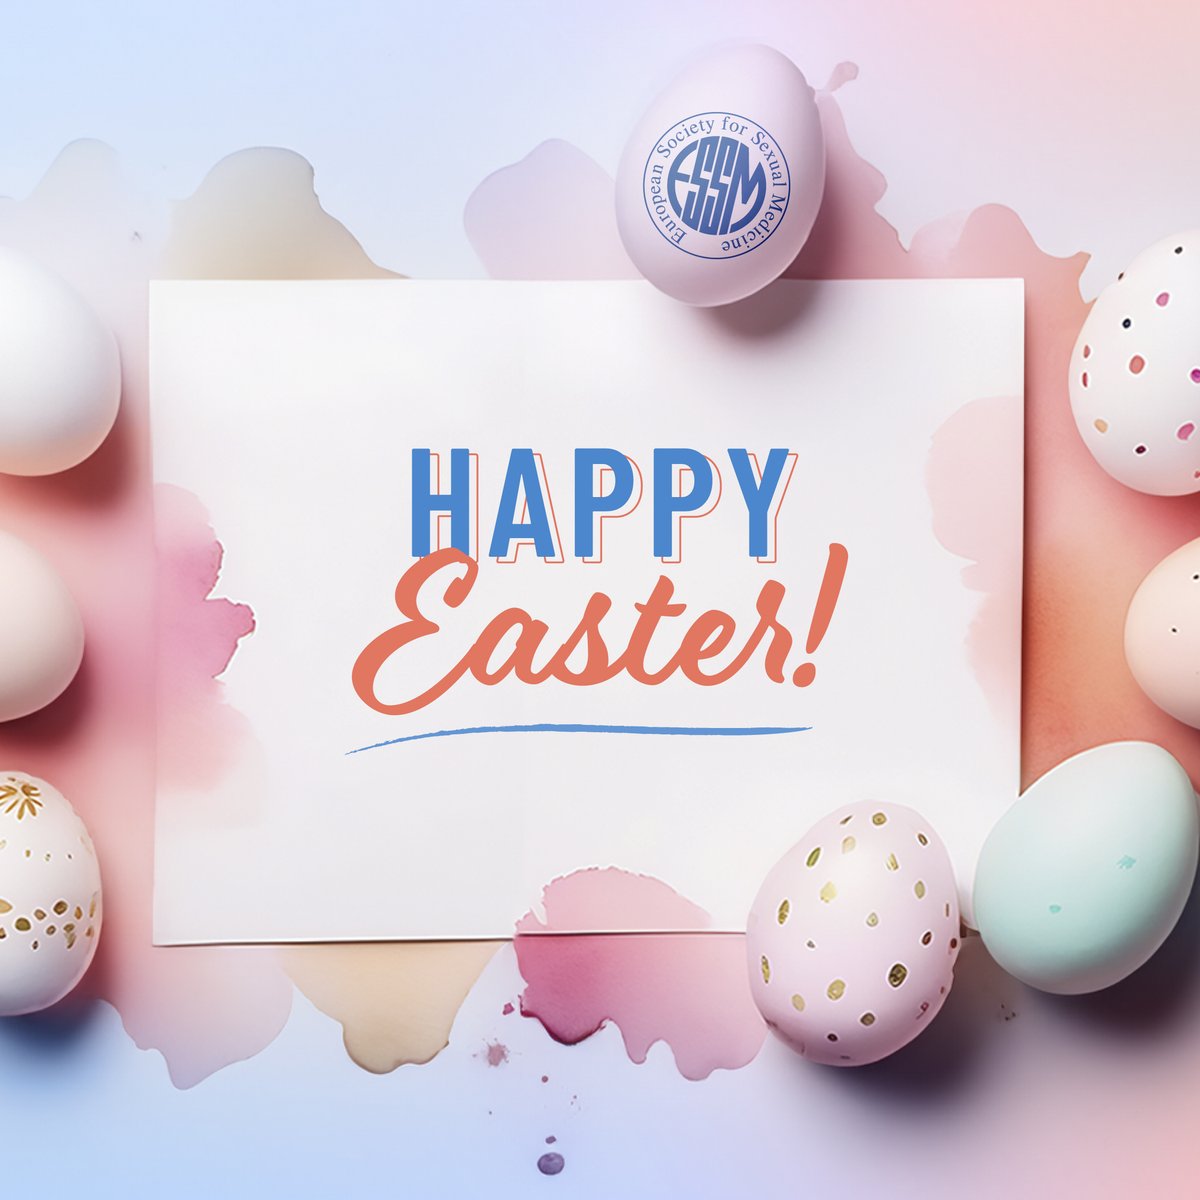 The European Society for Sexual Medicine wishes everyone a Happy Easter 🐰​

May your day be filled with plenty of ‘egg-citement' and delightful surprises! 🐣​

Take your chance and become an ESSM member 👉🏻 bit.ly/3IXStOk ​

#ESSM #SexualMedicine #SexualHealth #Sexology